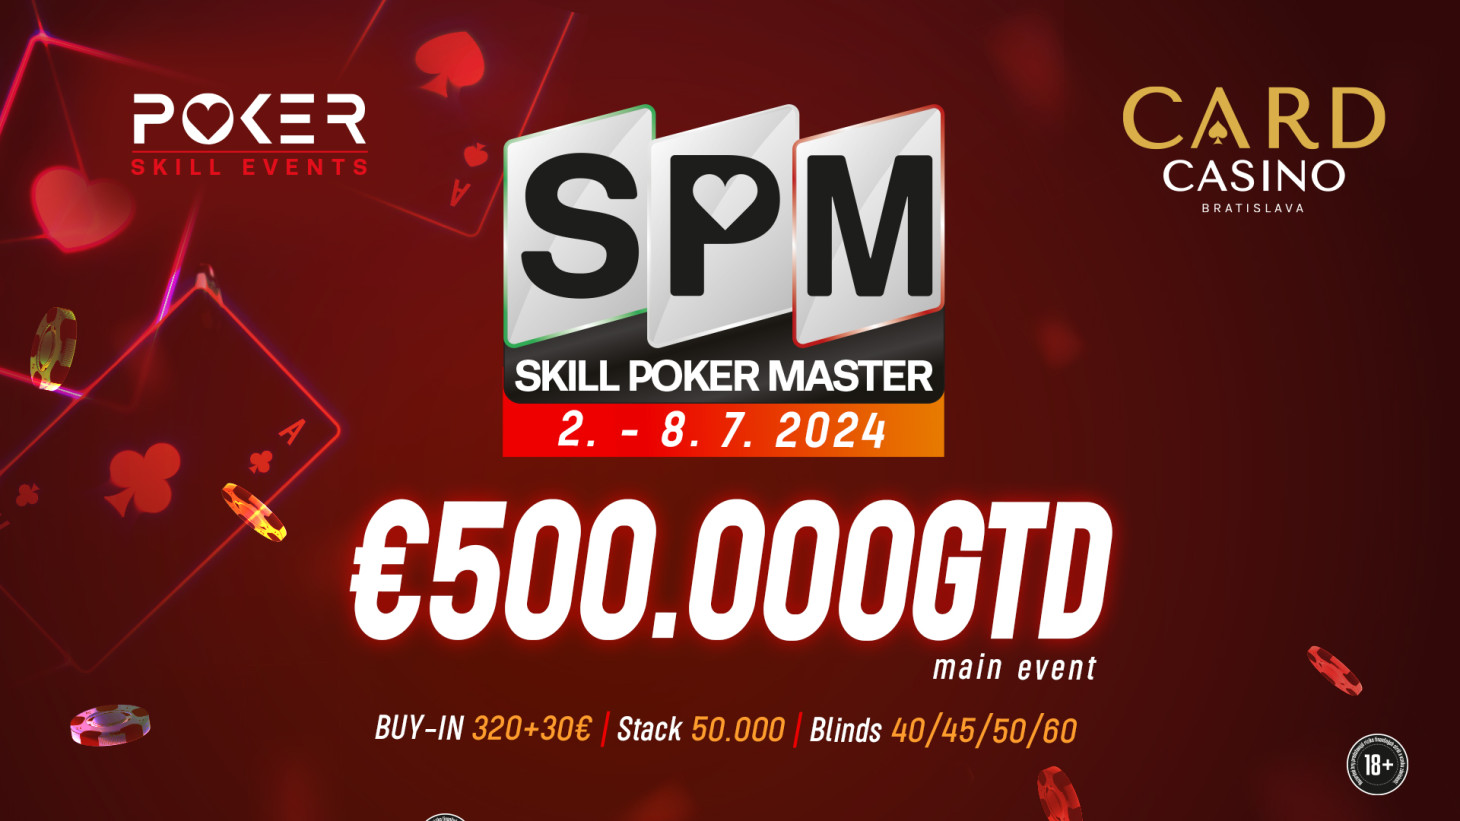 The Skill Poker Masters Festival is coming to Card with a €500,000 GTD Main Event!